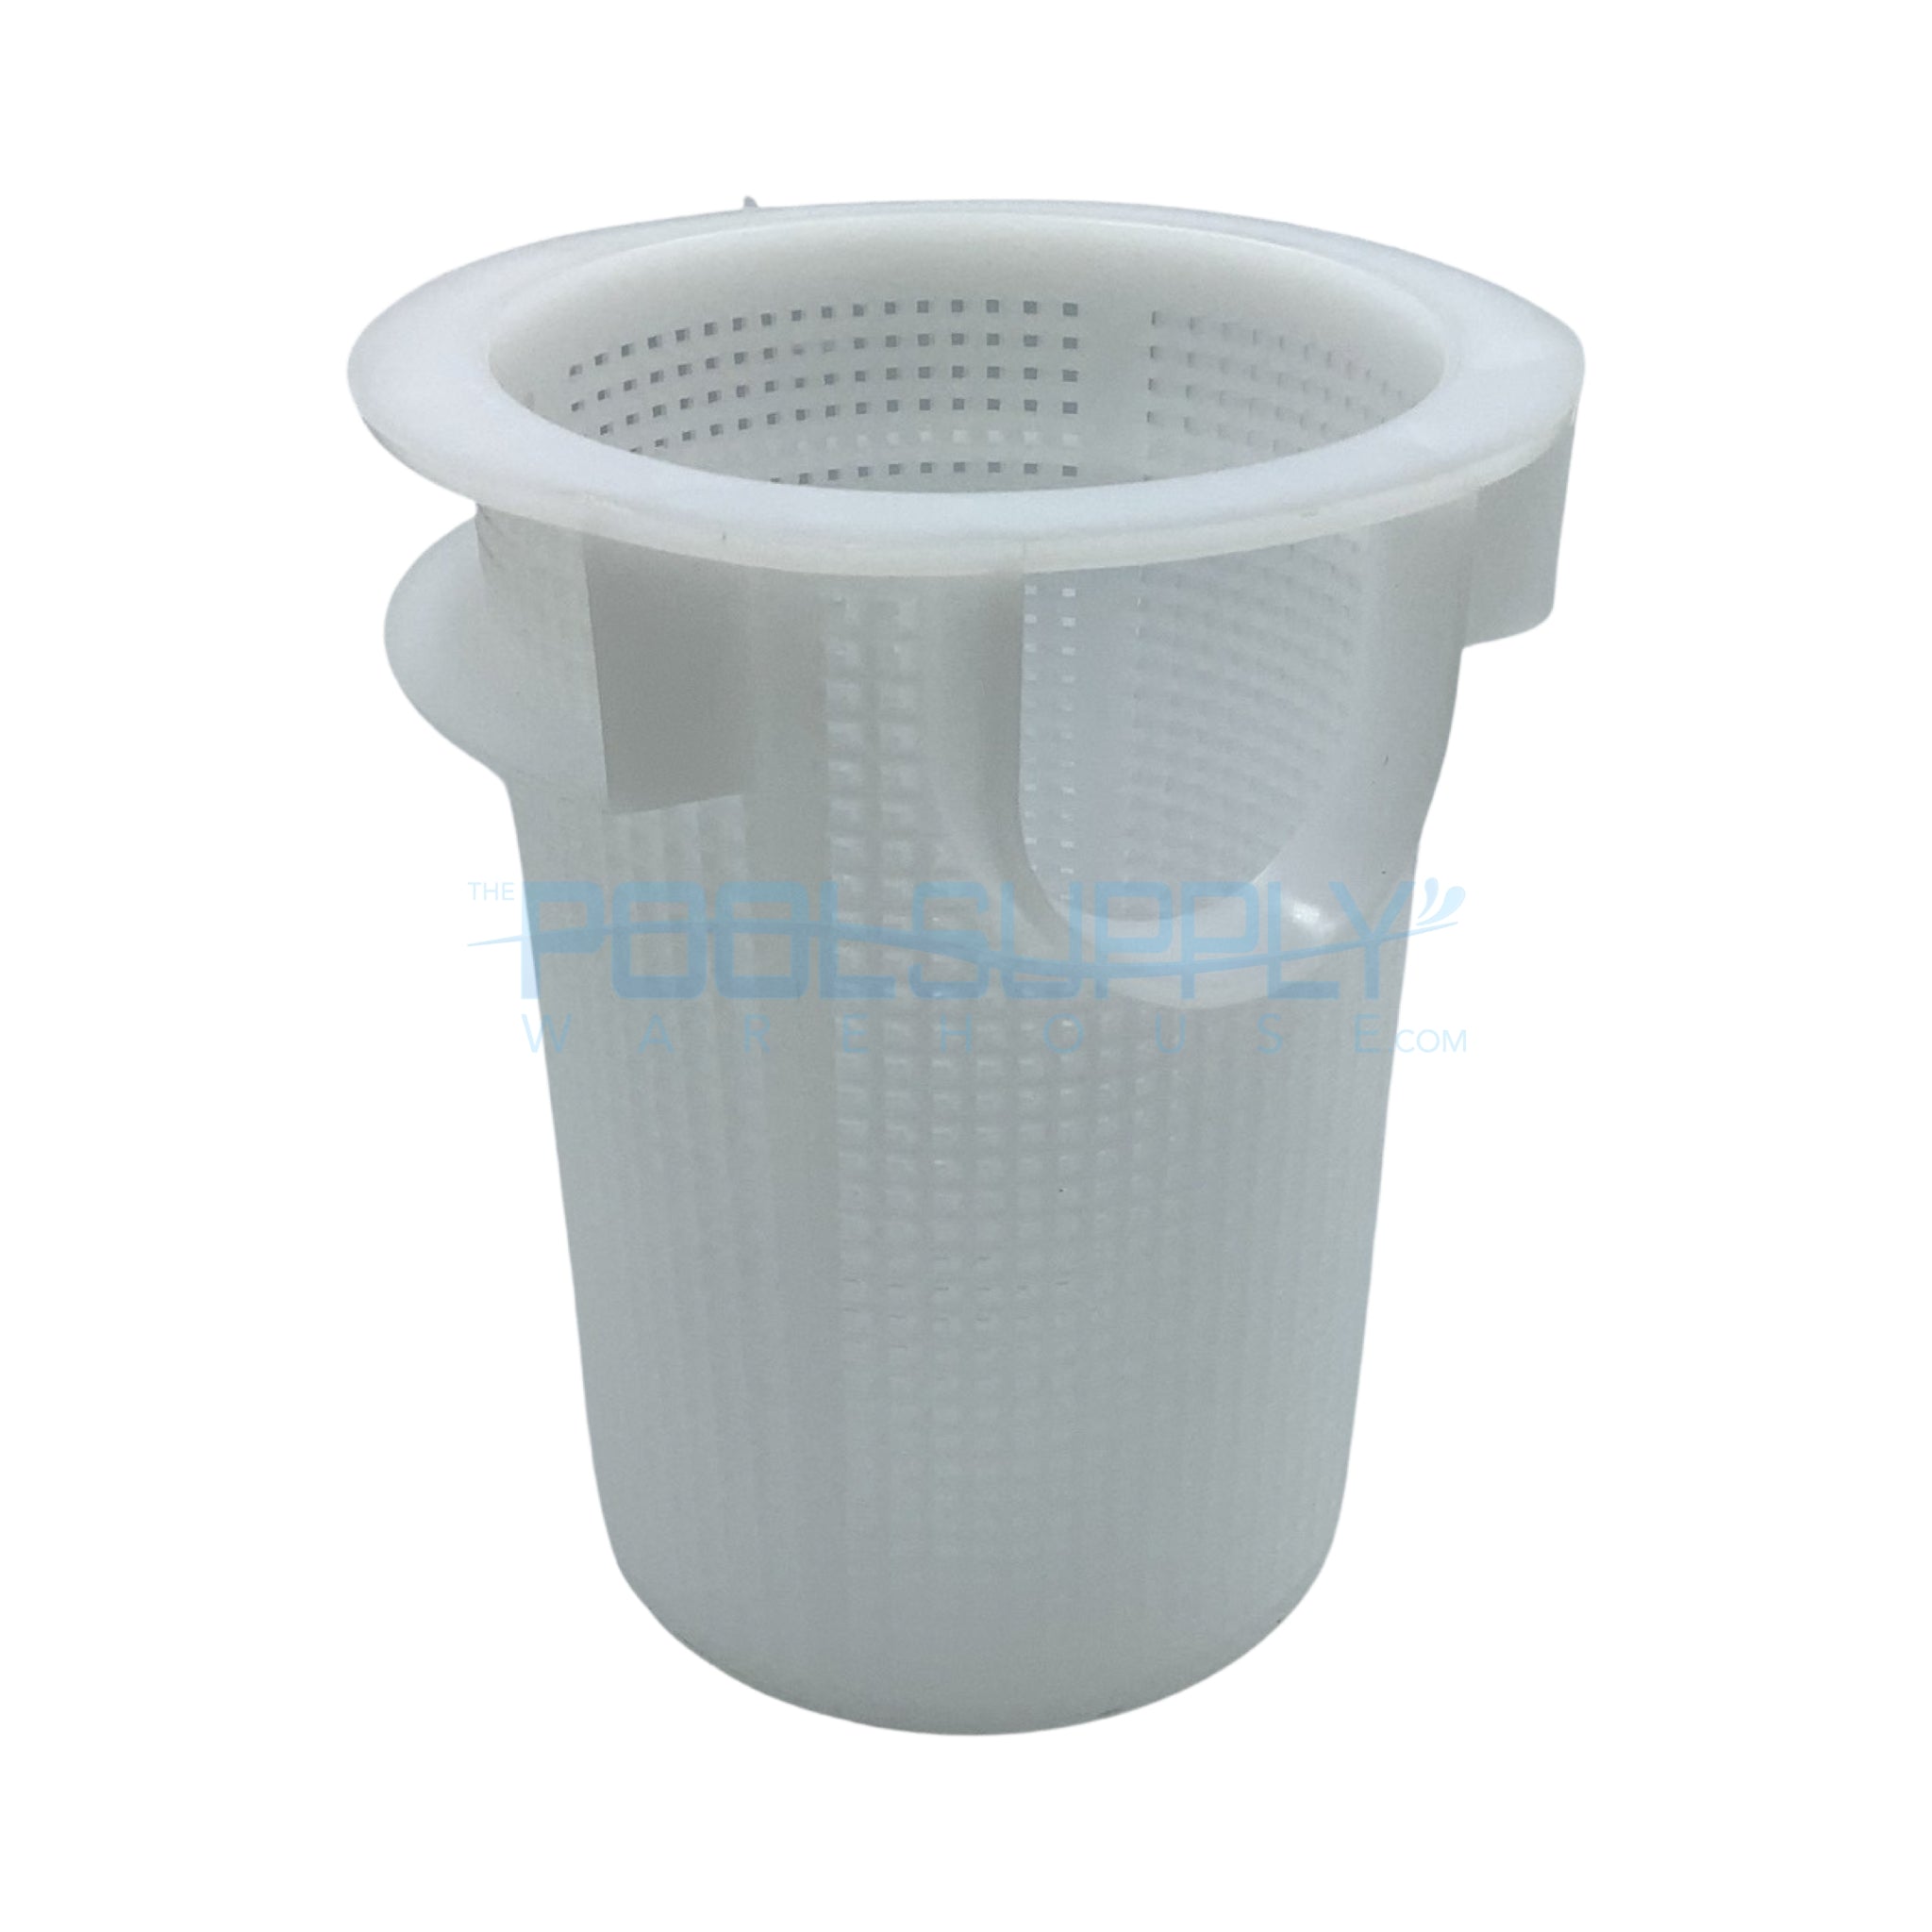 Pentair 6" Trap Strainer Basket - C8-58PZ - The Pool Supply Warehouse